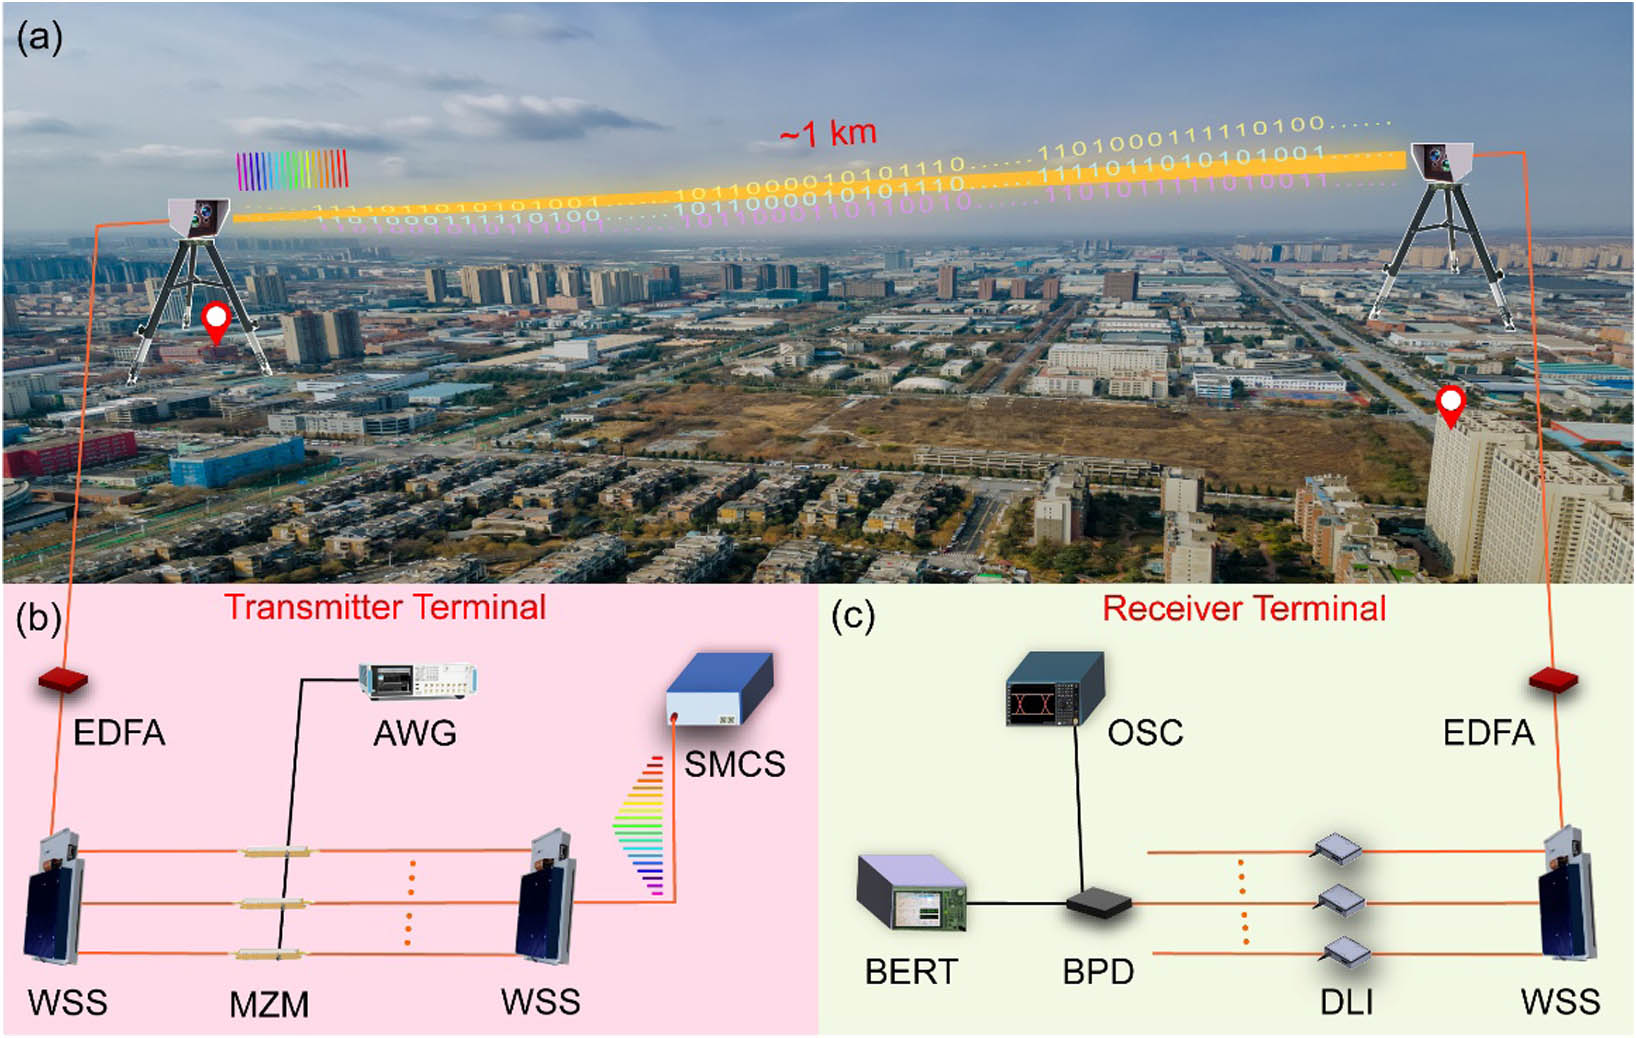 Schematic of soliton microcomb-based massively parallel FSO communication system. (a) The experiment scenario of the FSO communication system. The transmitter and receiver terminals are installed at two buildings with a straight-line distance of ∼1 km. The power penalty of the space link is ∼40 dB using two lenses with a 25 mm aperture as optical antennas. (b) The schematic diagram of the transmitter terminal. An SMC is used as a multiwavelength optical source which is demultiplexed using a commercial WSS. All the optical carriers are modulated by high-speed signals with the format of non-return-to-zero differential phase shift keying. All the optical signals are multiplexed together and amplified by an EDFA. (c) The schematic diagram of the receiver terminal. The received optical signals are demultiplexed by a WSS and demodulated using a DLI technique. SMC, soliton microcomb; WSS, wavelength selective switch; EDFA, erbium-doped fiber amplifier; MZM, Mach–Zehnder modulator; AWG, arbitrary waveform generator; DLI, delay line interferometer; BPD, balanced photodetector; OSC, oscilloscope; BERT, bit error rate tester.